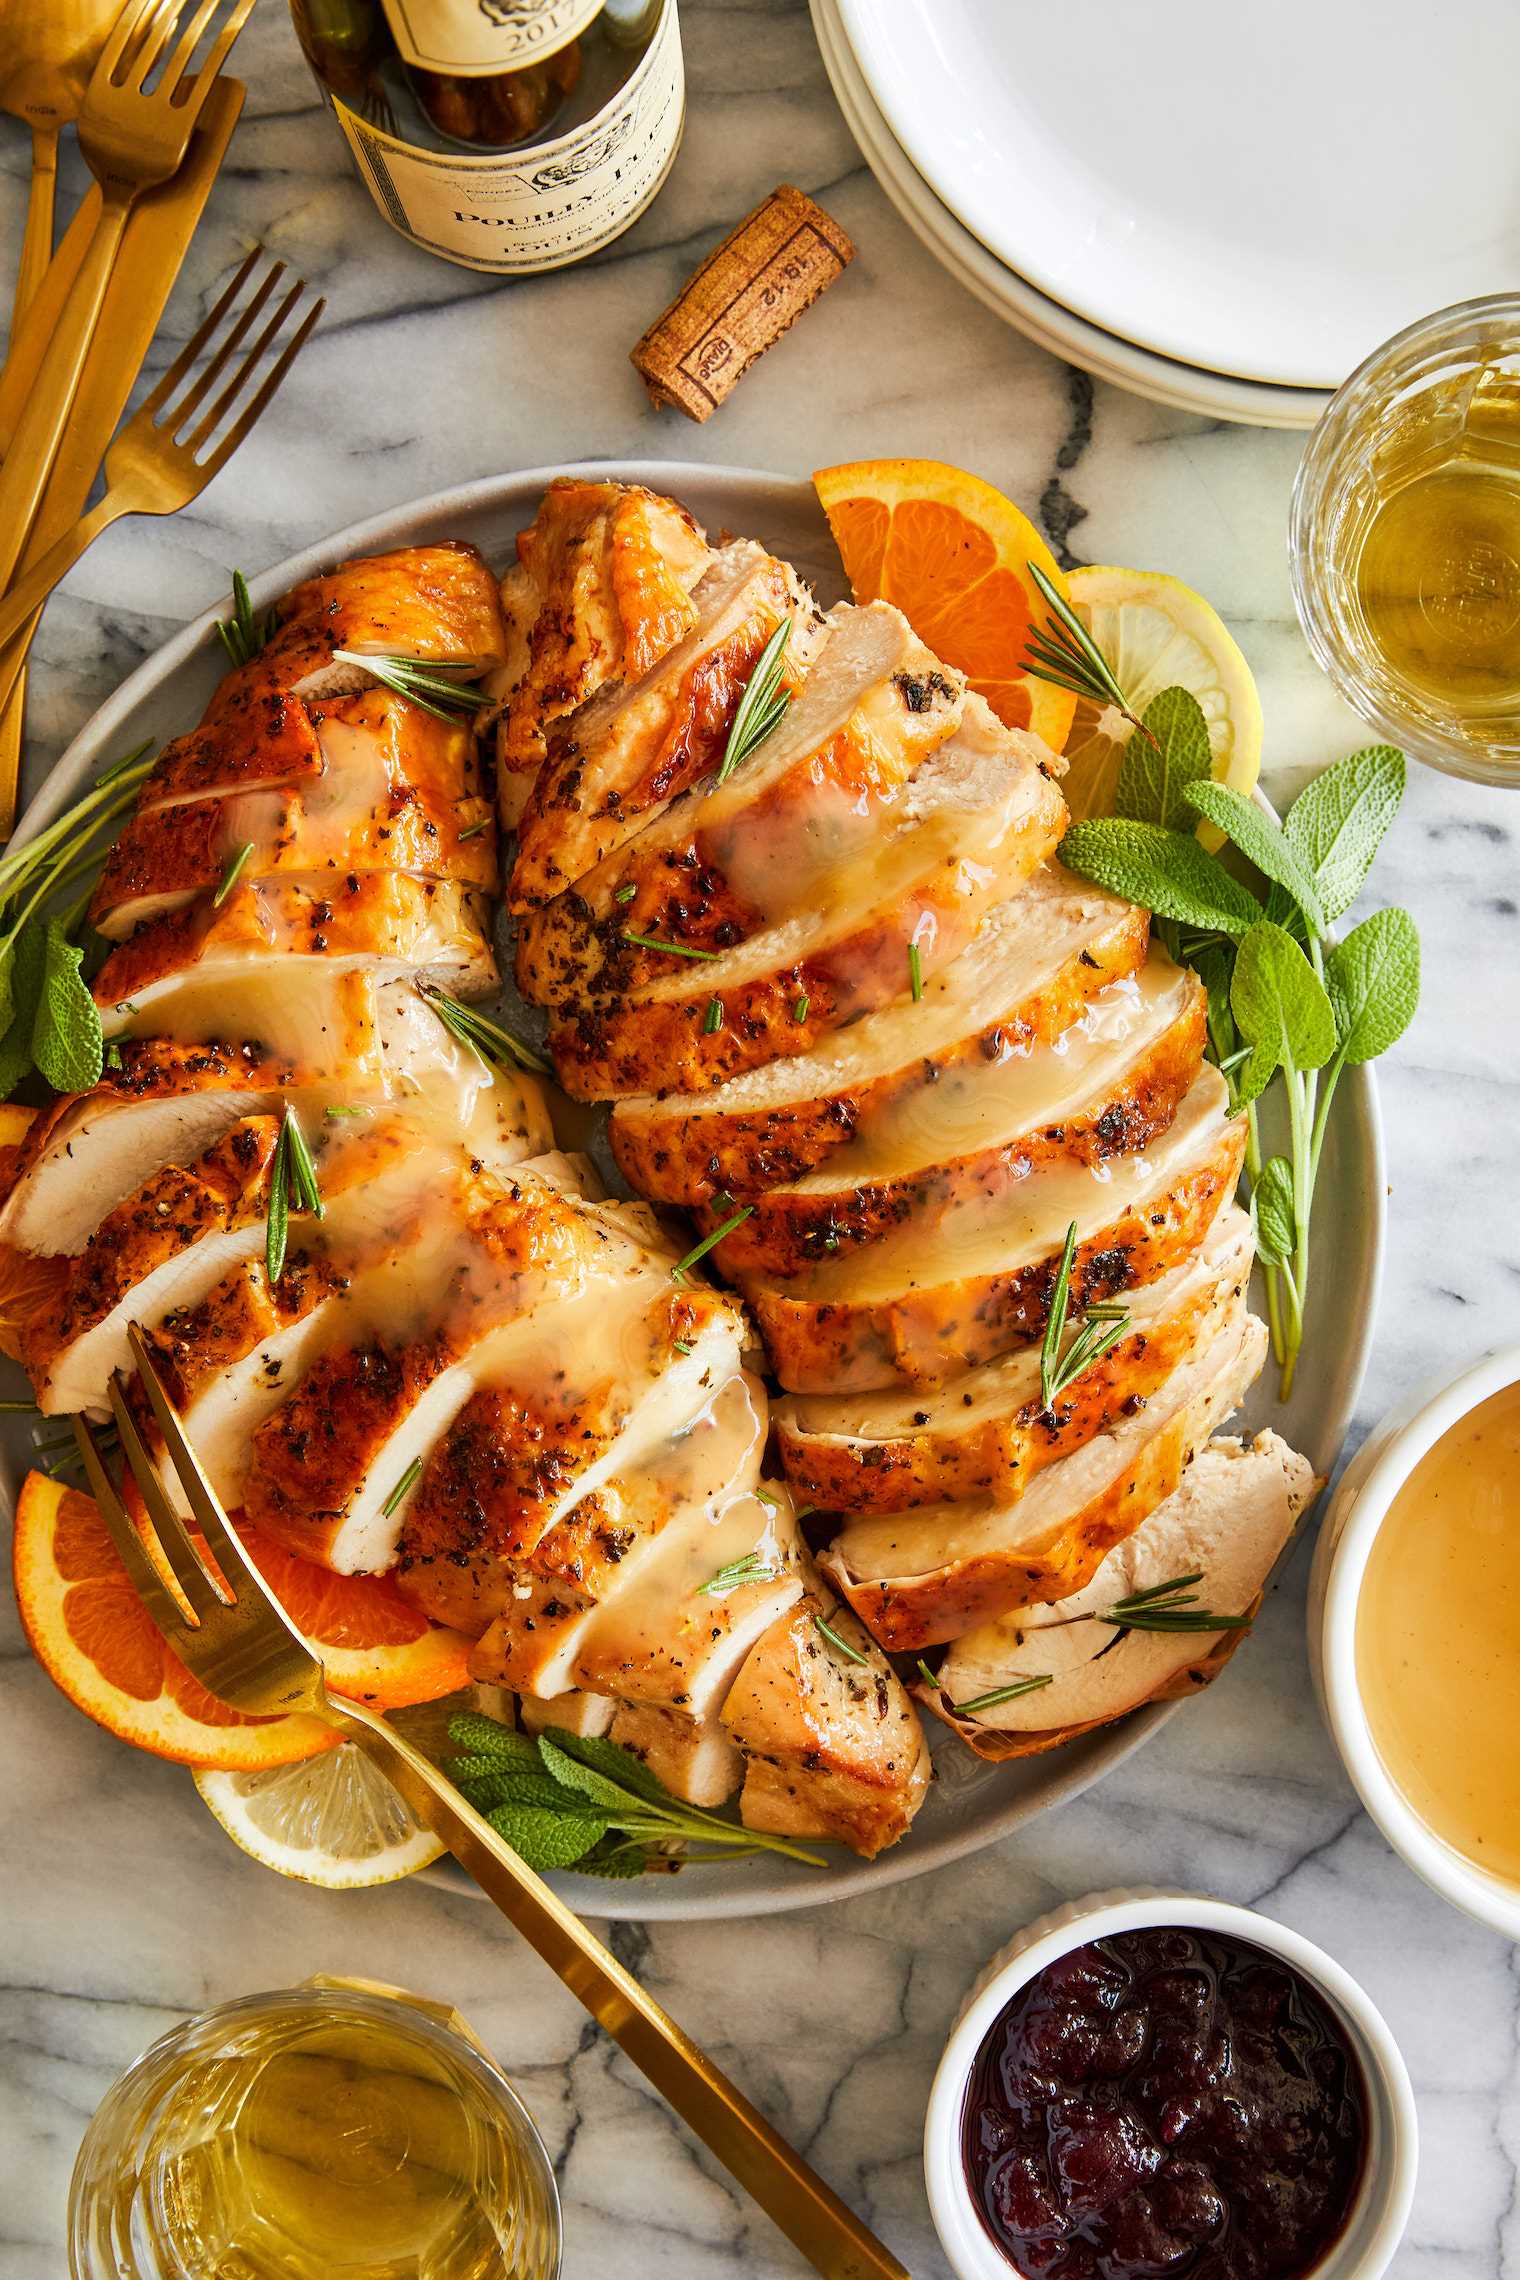 Roasted Turkey Breast - Yields the most tender, juicy meat with the crispiest skin! 15-20 min prep time. That